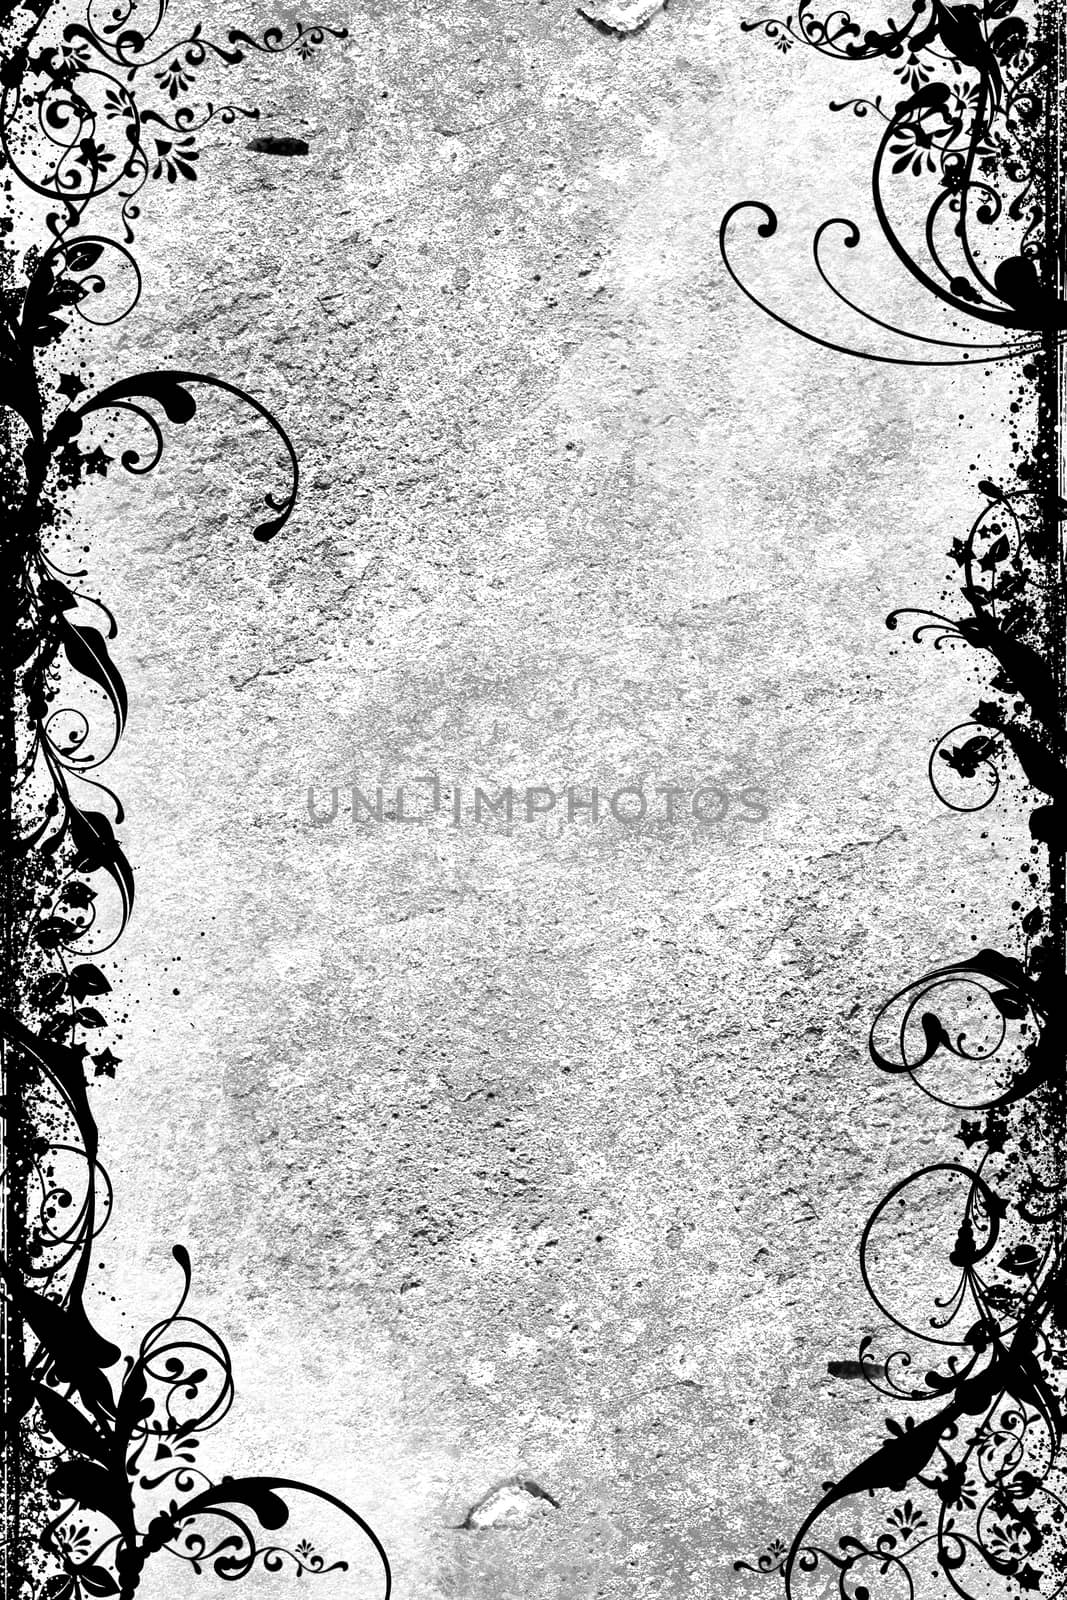 Grungy Wall Background. Grungy Gray Wall with Black Floral Ornaments. Vertical Background.